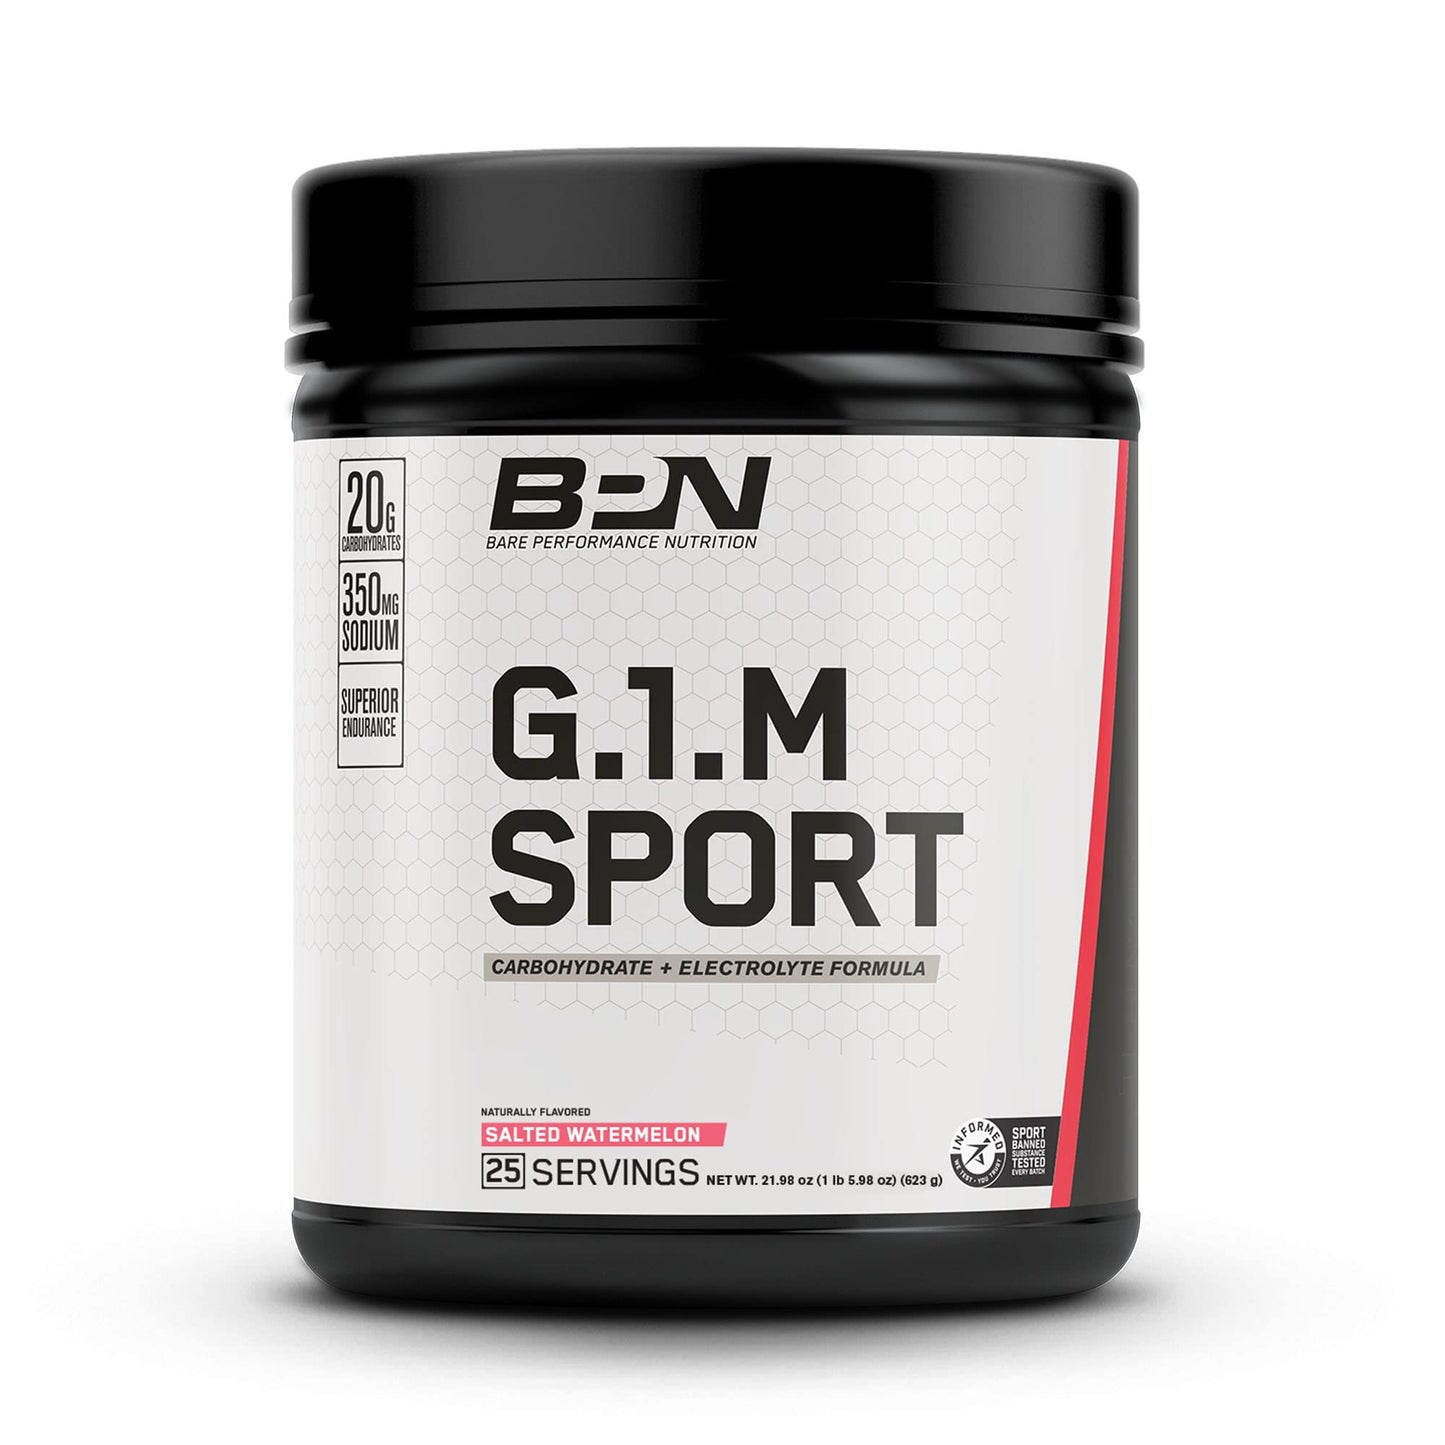 BARE PERFORMANCE NUTRITION, BPN G.1.M Go One More Sport, Endurance Training Fuel, Salted Watermelon, Superior Carbohydrate Source & Electrolyte Formula, Reduce Fatigue, 25 Servings